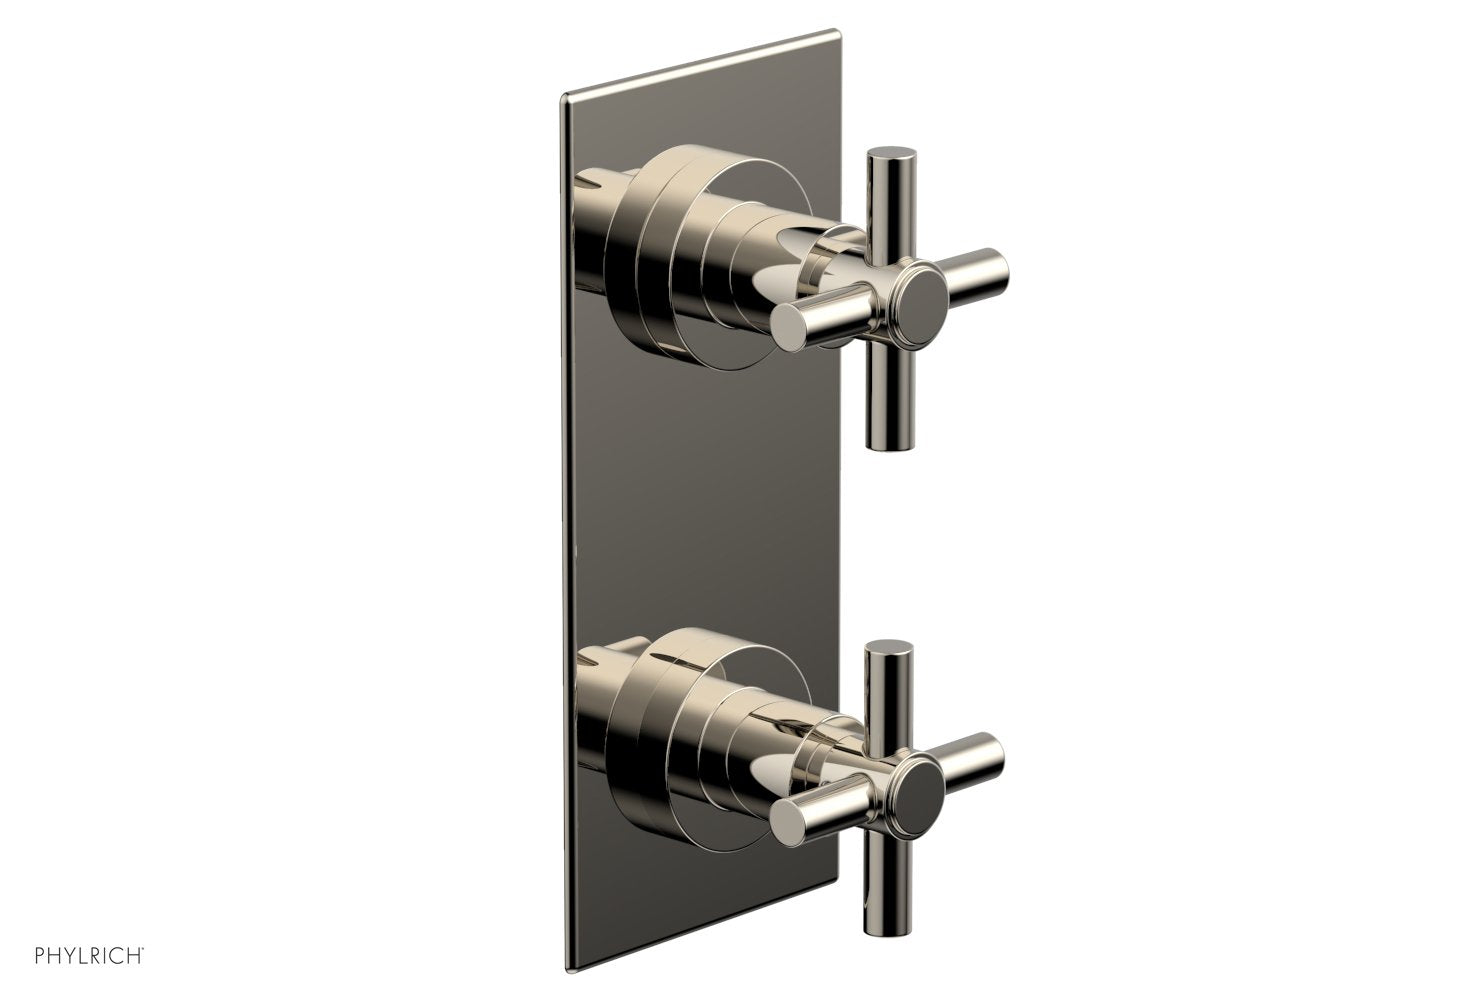 Phylrich BASIC 1/2" Thermostatic Valve with Volume Control or Diverter Cross Handles